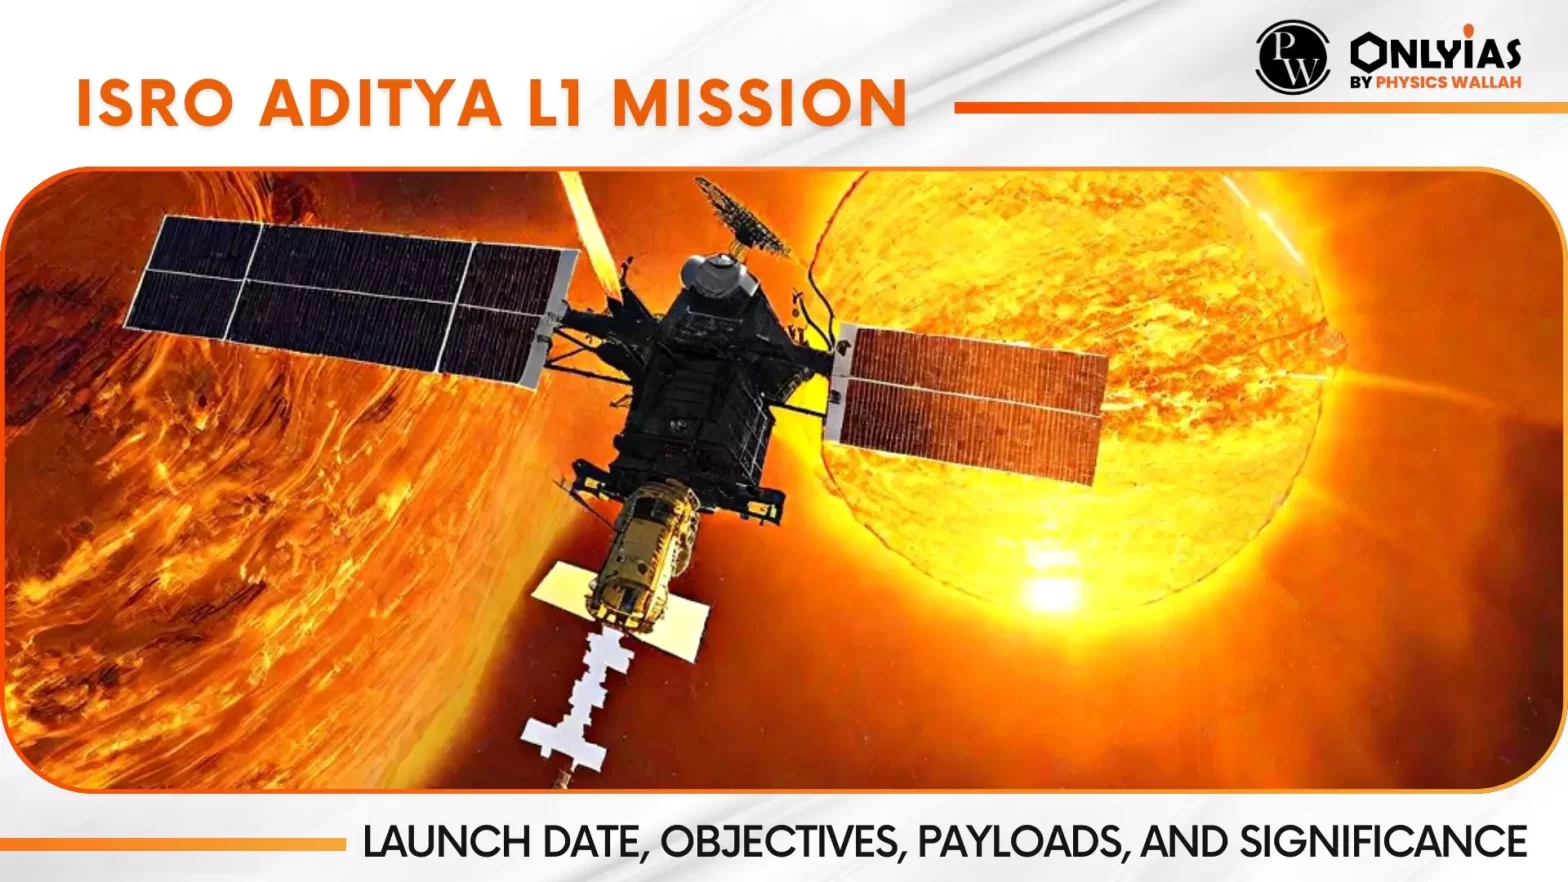 ISRO Aditya L1 Mission: Launch Date, Objectives, Payloads, and Significance